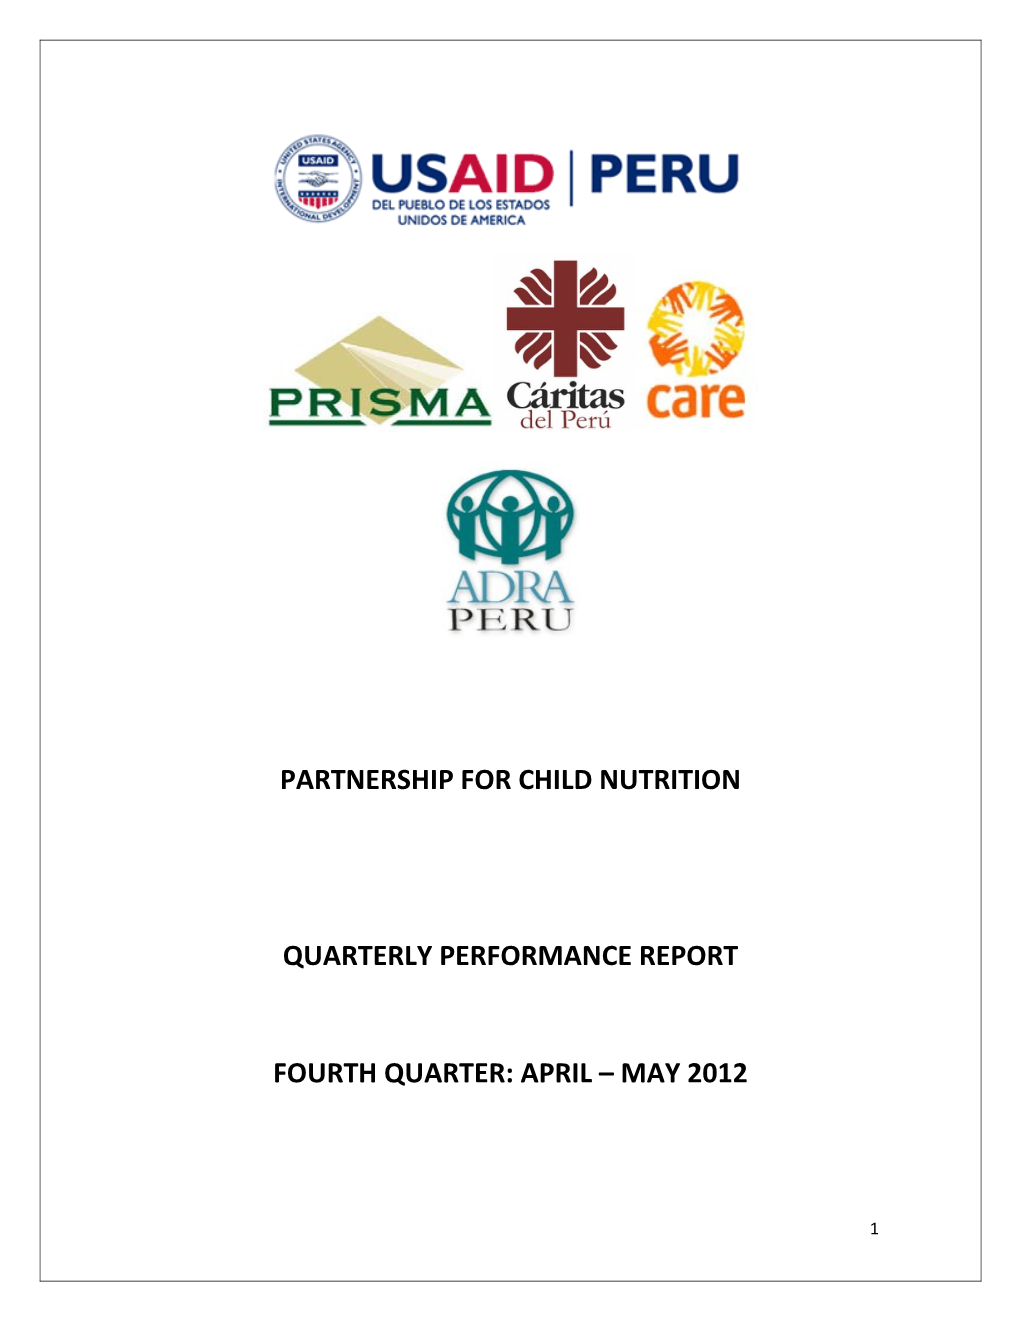 Partnership for Child Nutrition